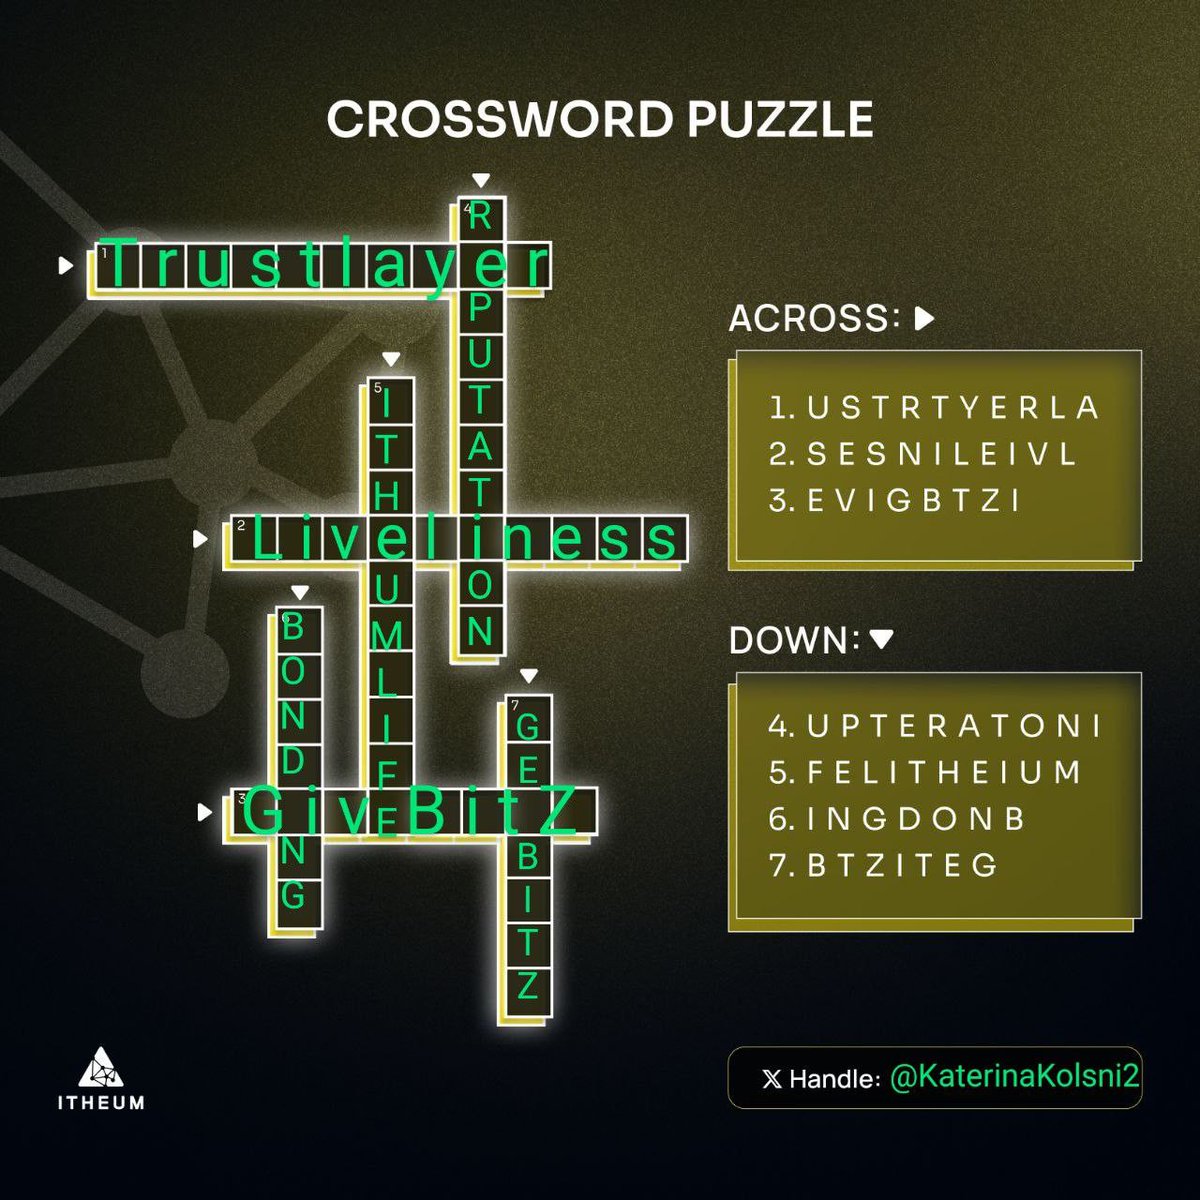 The latest and my all time favorite @Itheum Trailblazer Quest is almost over.T he crossword puzzle worked quickly, we just have to wait for the results. But you can still have time to participate and also collect some BiTz points to increase your reward #Itheum #Ith4umLife #Data